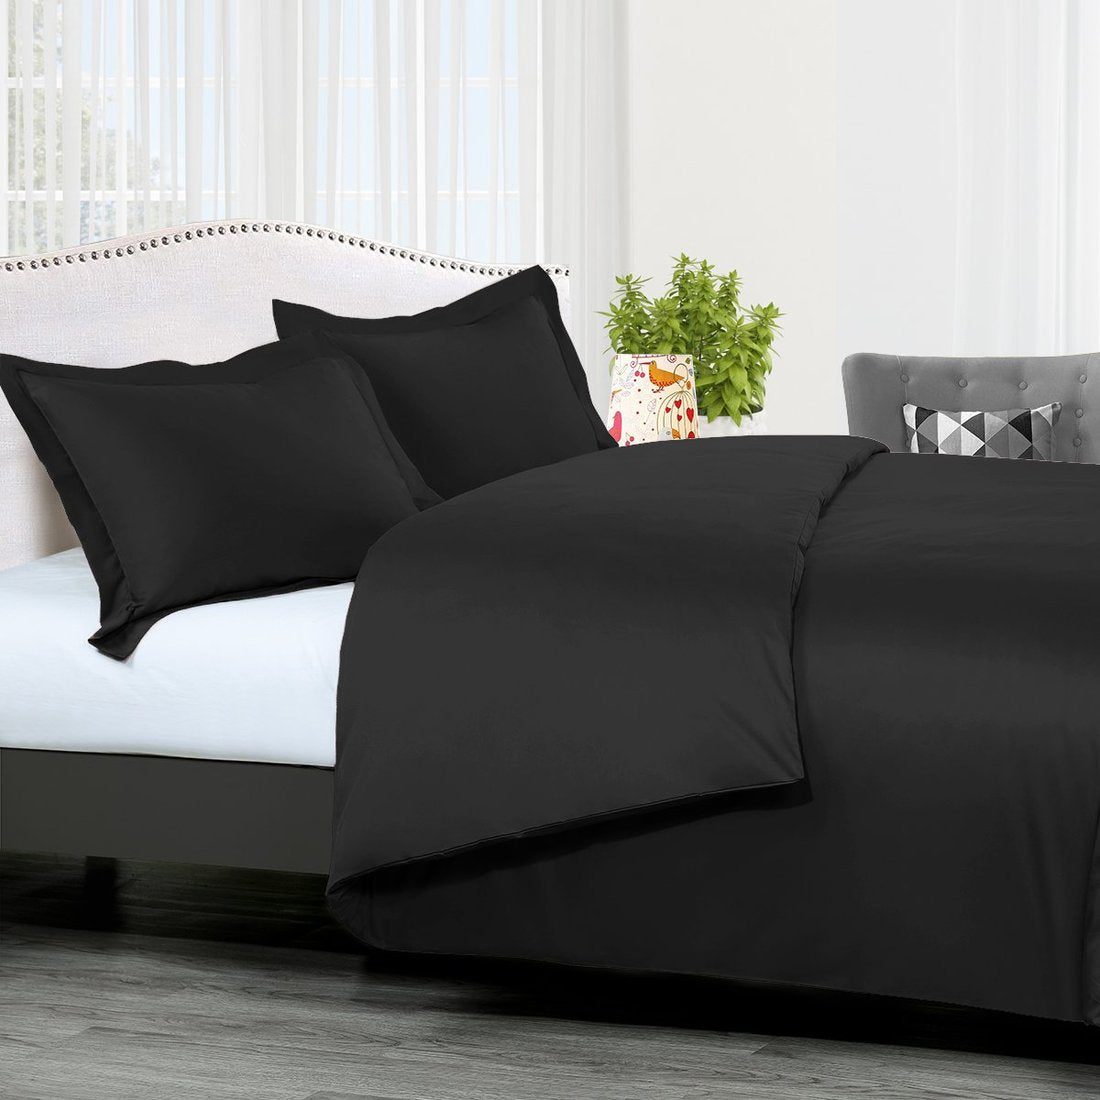 How Black Flat Egyptian Cotton Sheets Will Transform Your Sleep?